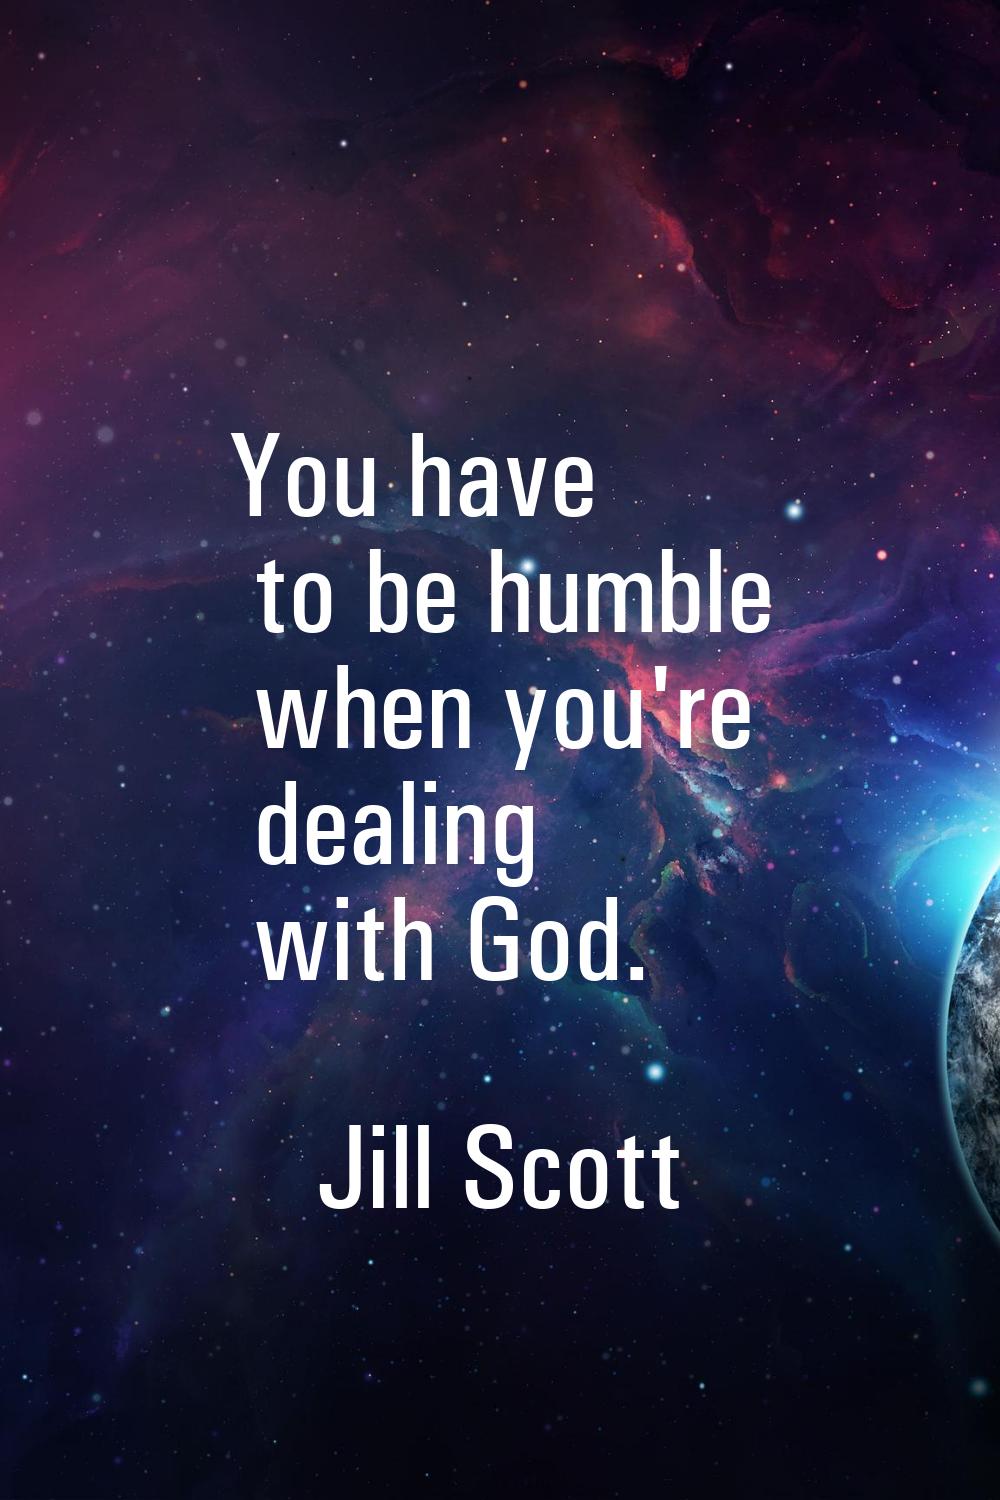 You have to be humble when you're dealing with God.